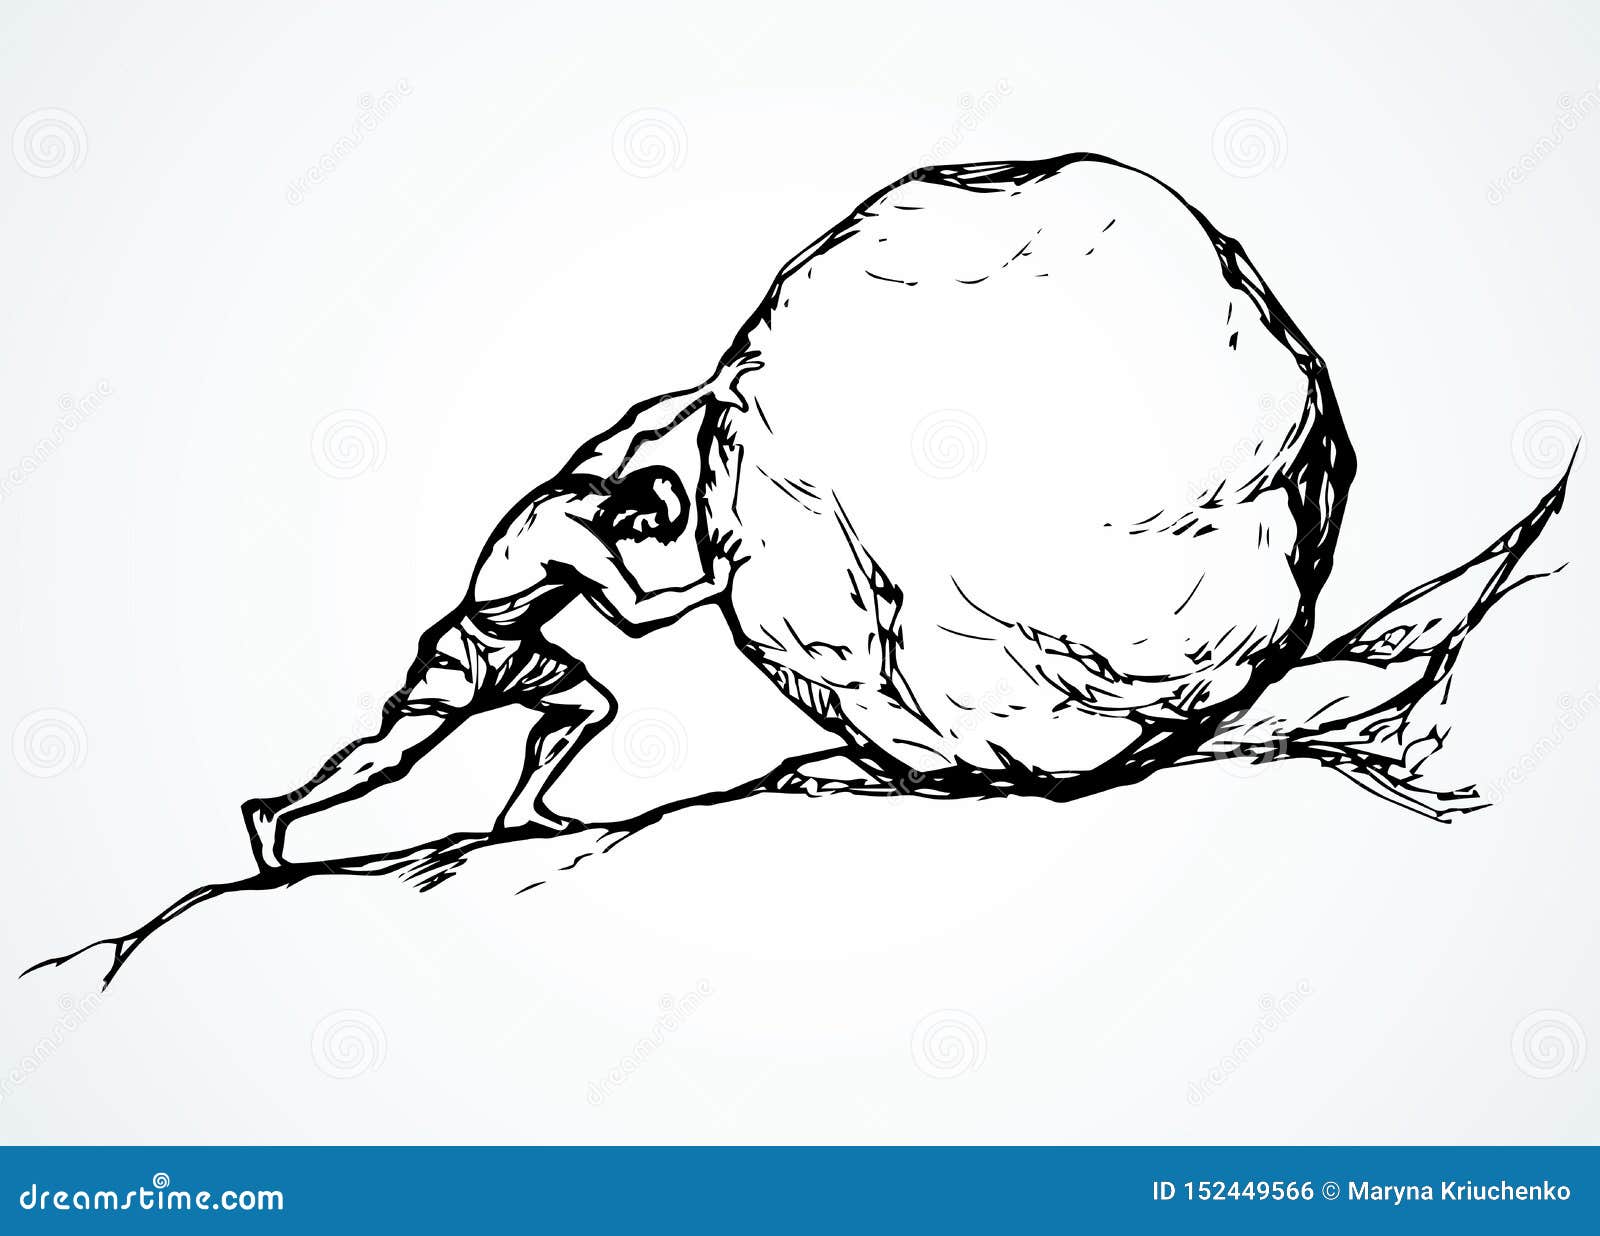 a man rolls a stone up the hill.  drawing